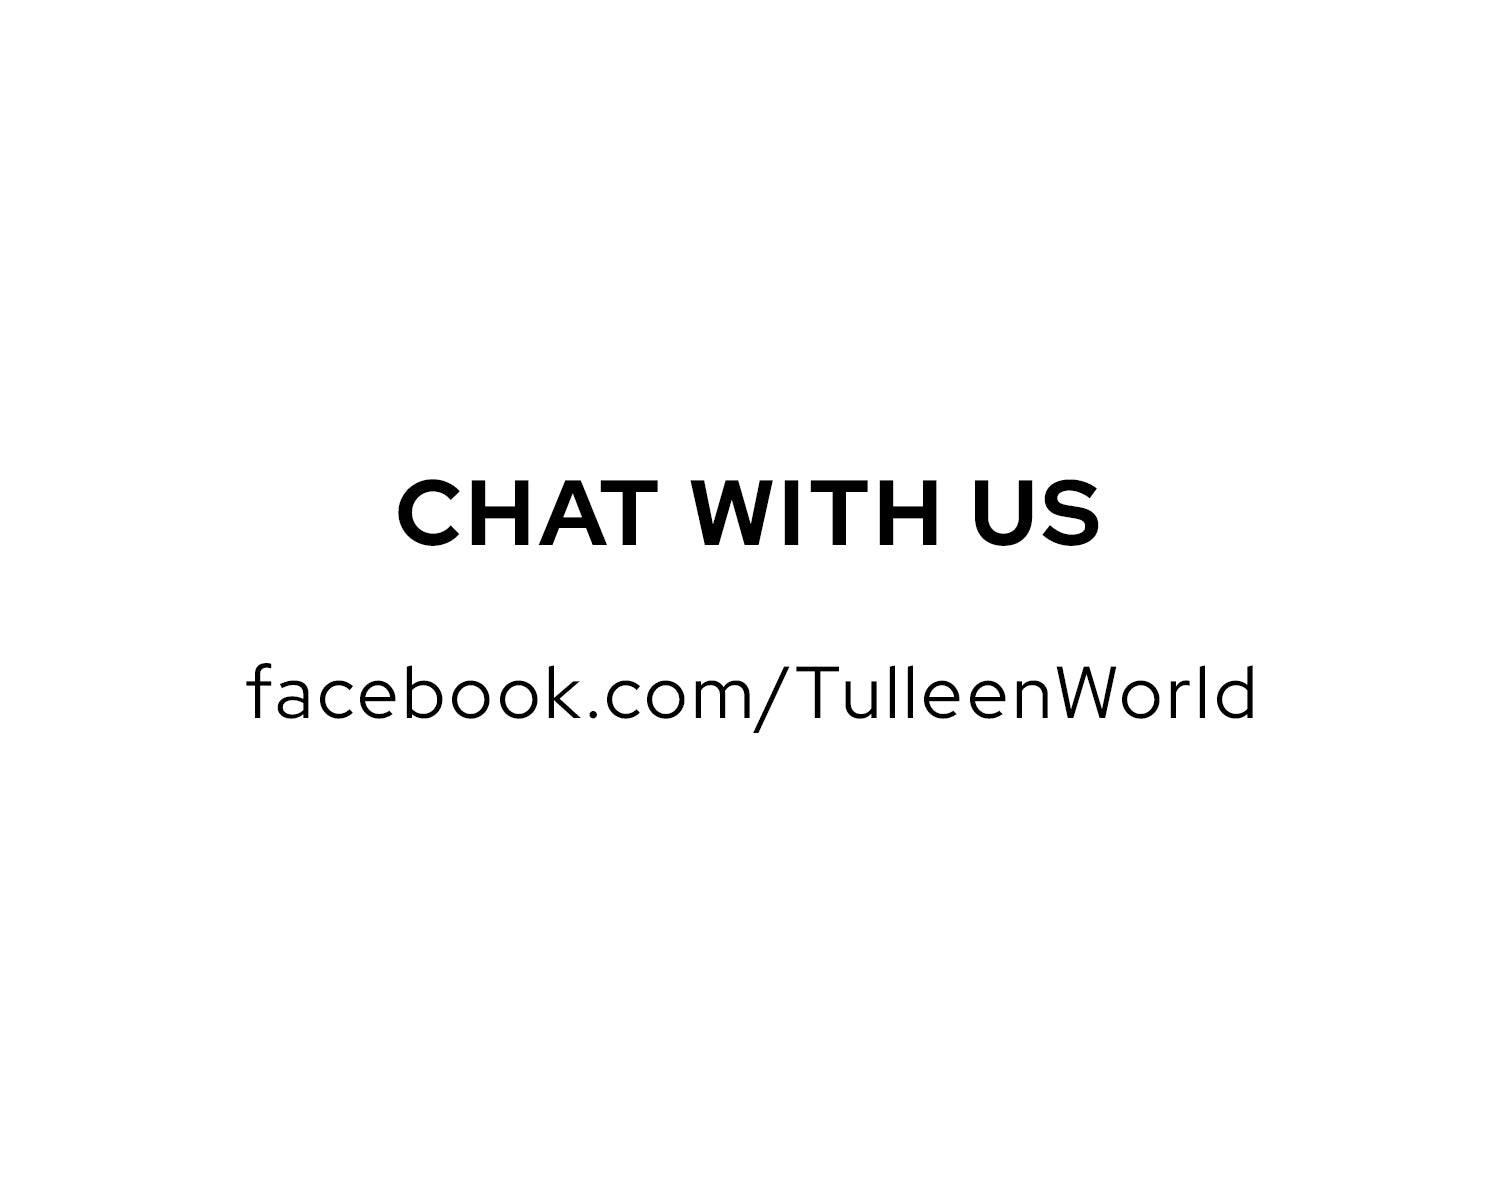 Chat with us on Facebook